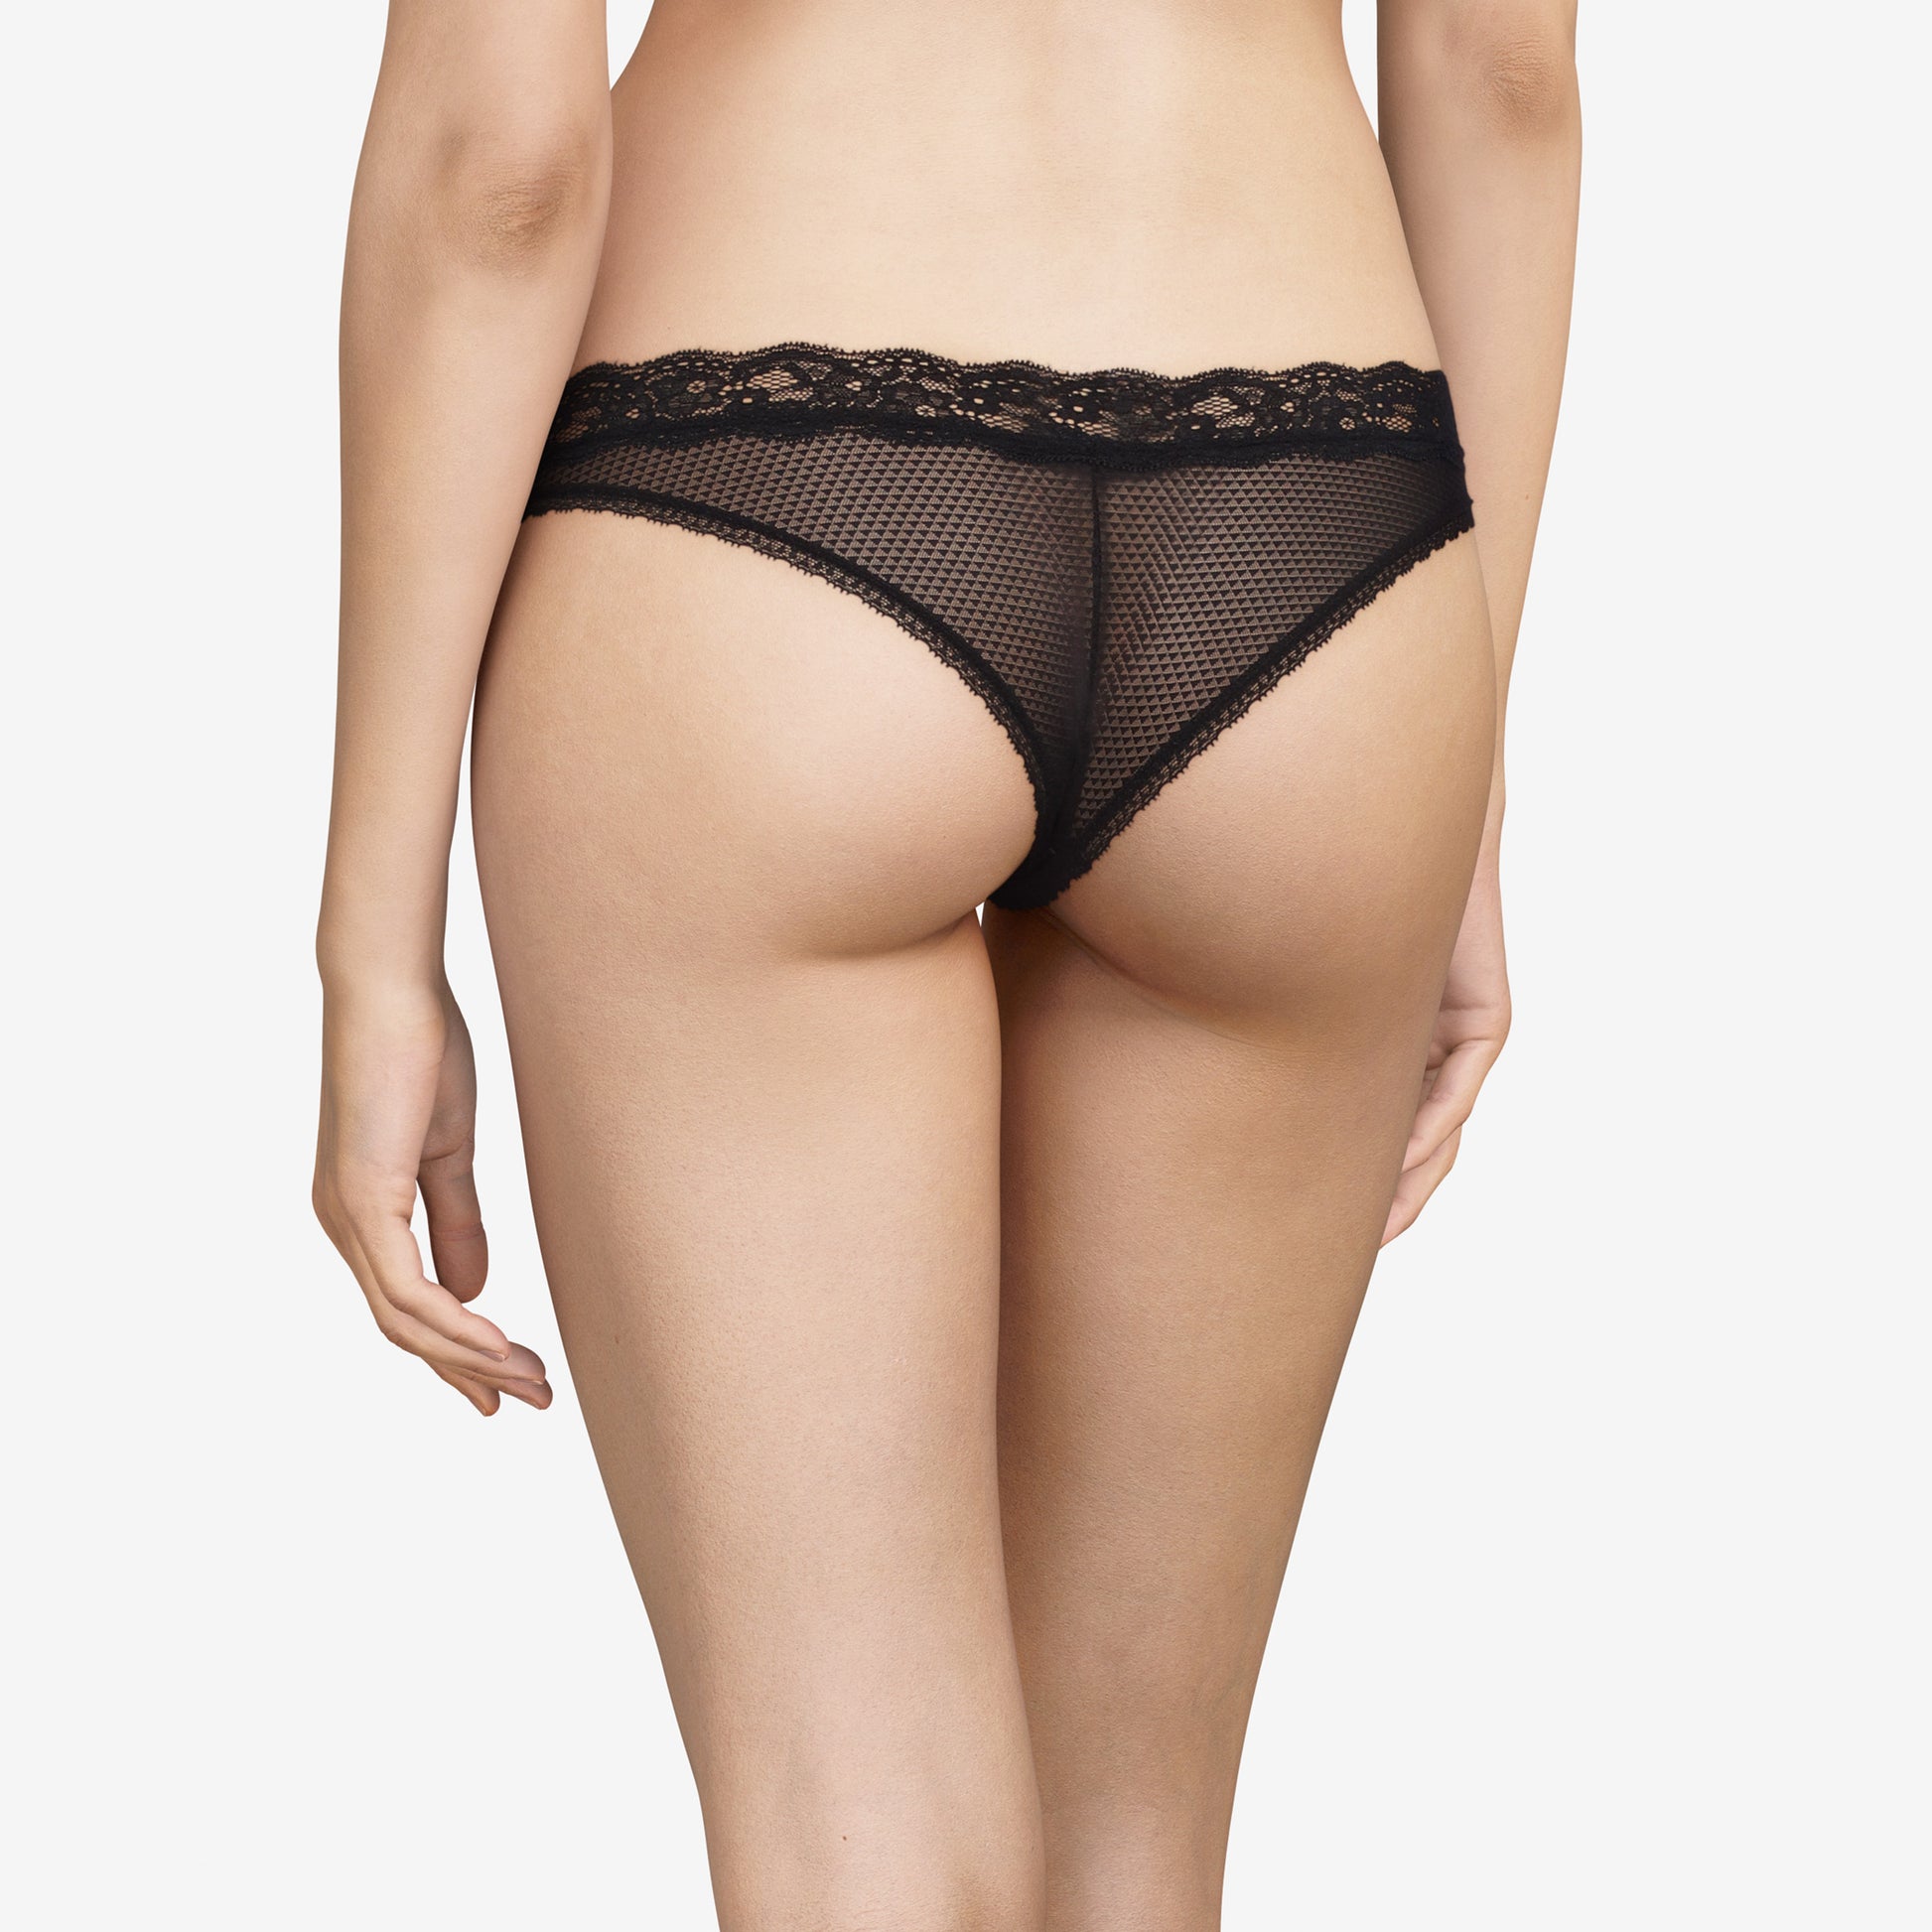 Pretty Things Chantelle Passionata Black Thong - Underwear Specialists 